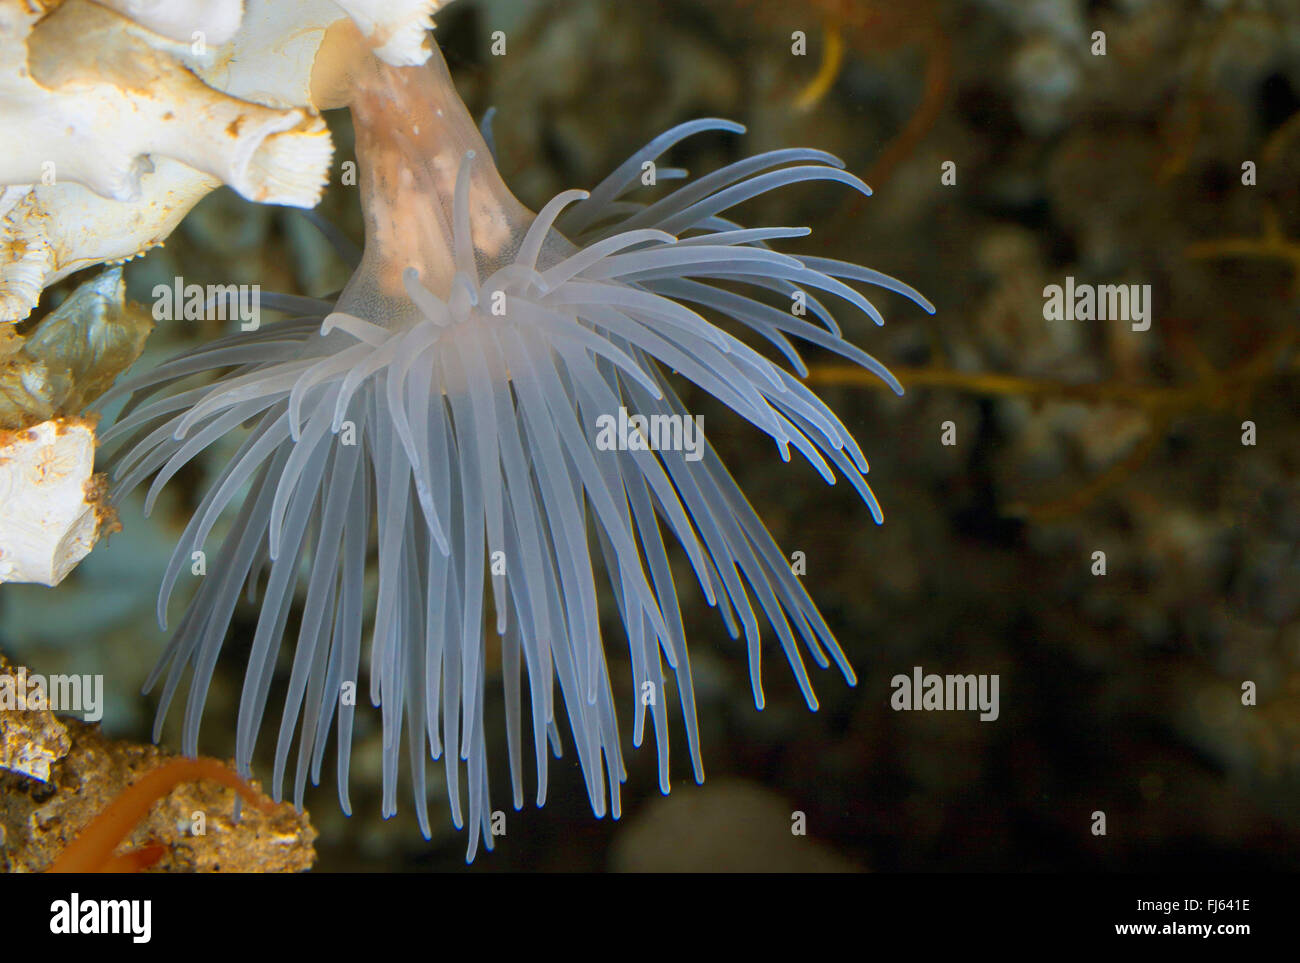 sea anemone (Protanthea simplex), at a coral Stock Photo